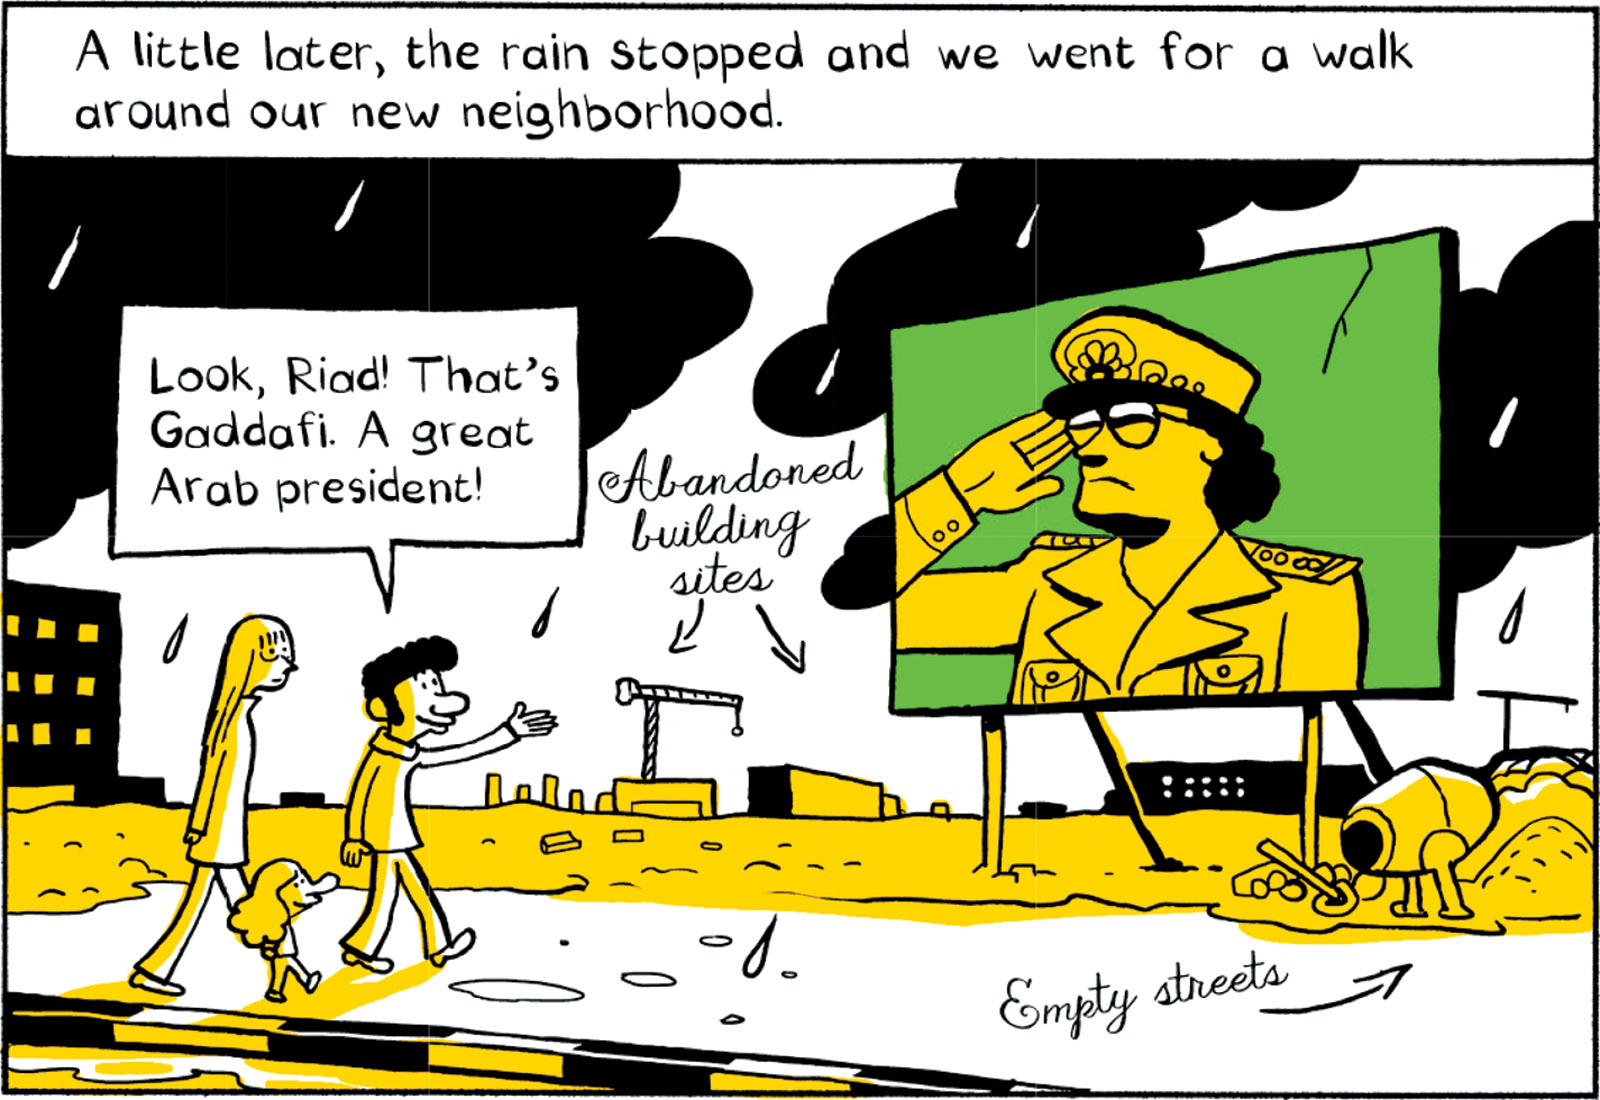 A panel from Riad Sattouf’s graphic memoir The Arab of the Future